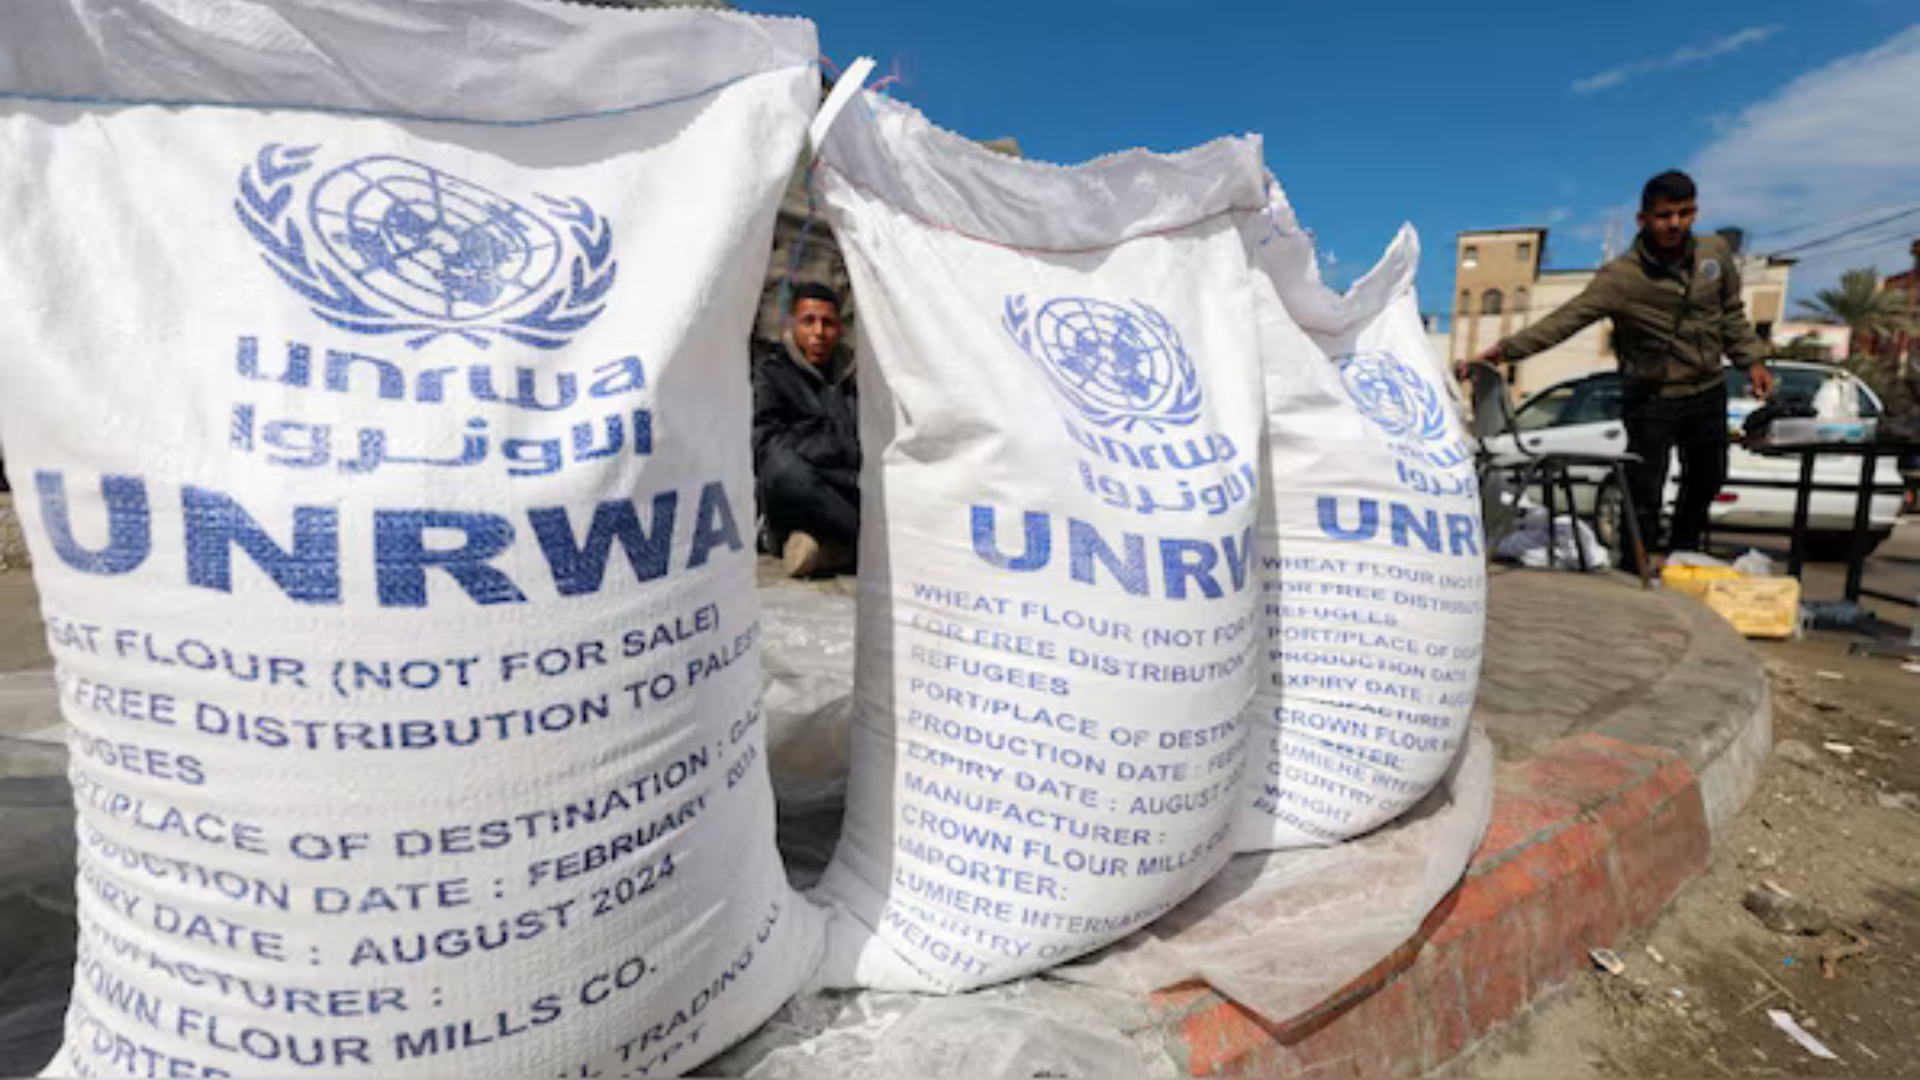 Canada and Sweden Resume UNRWA Funding After Suspension Due to Terror Allegations Against Staff